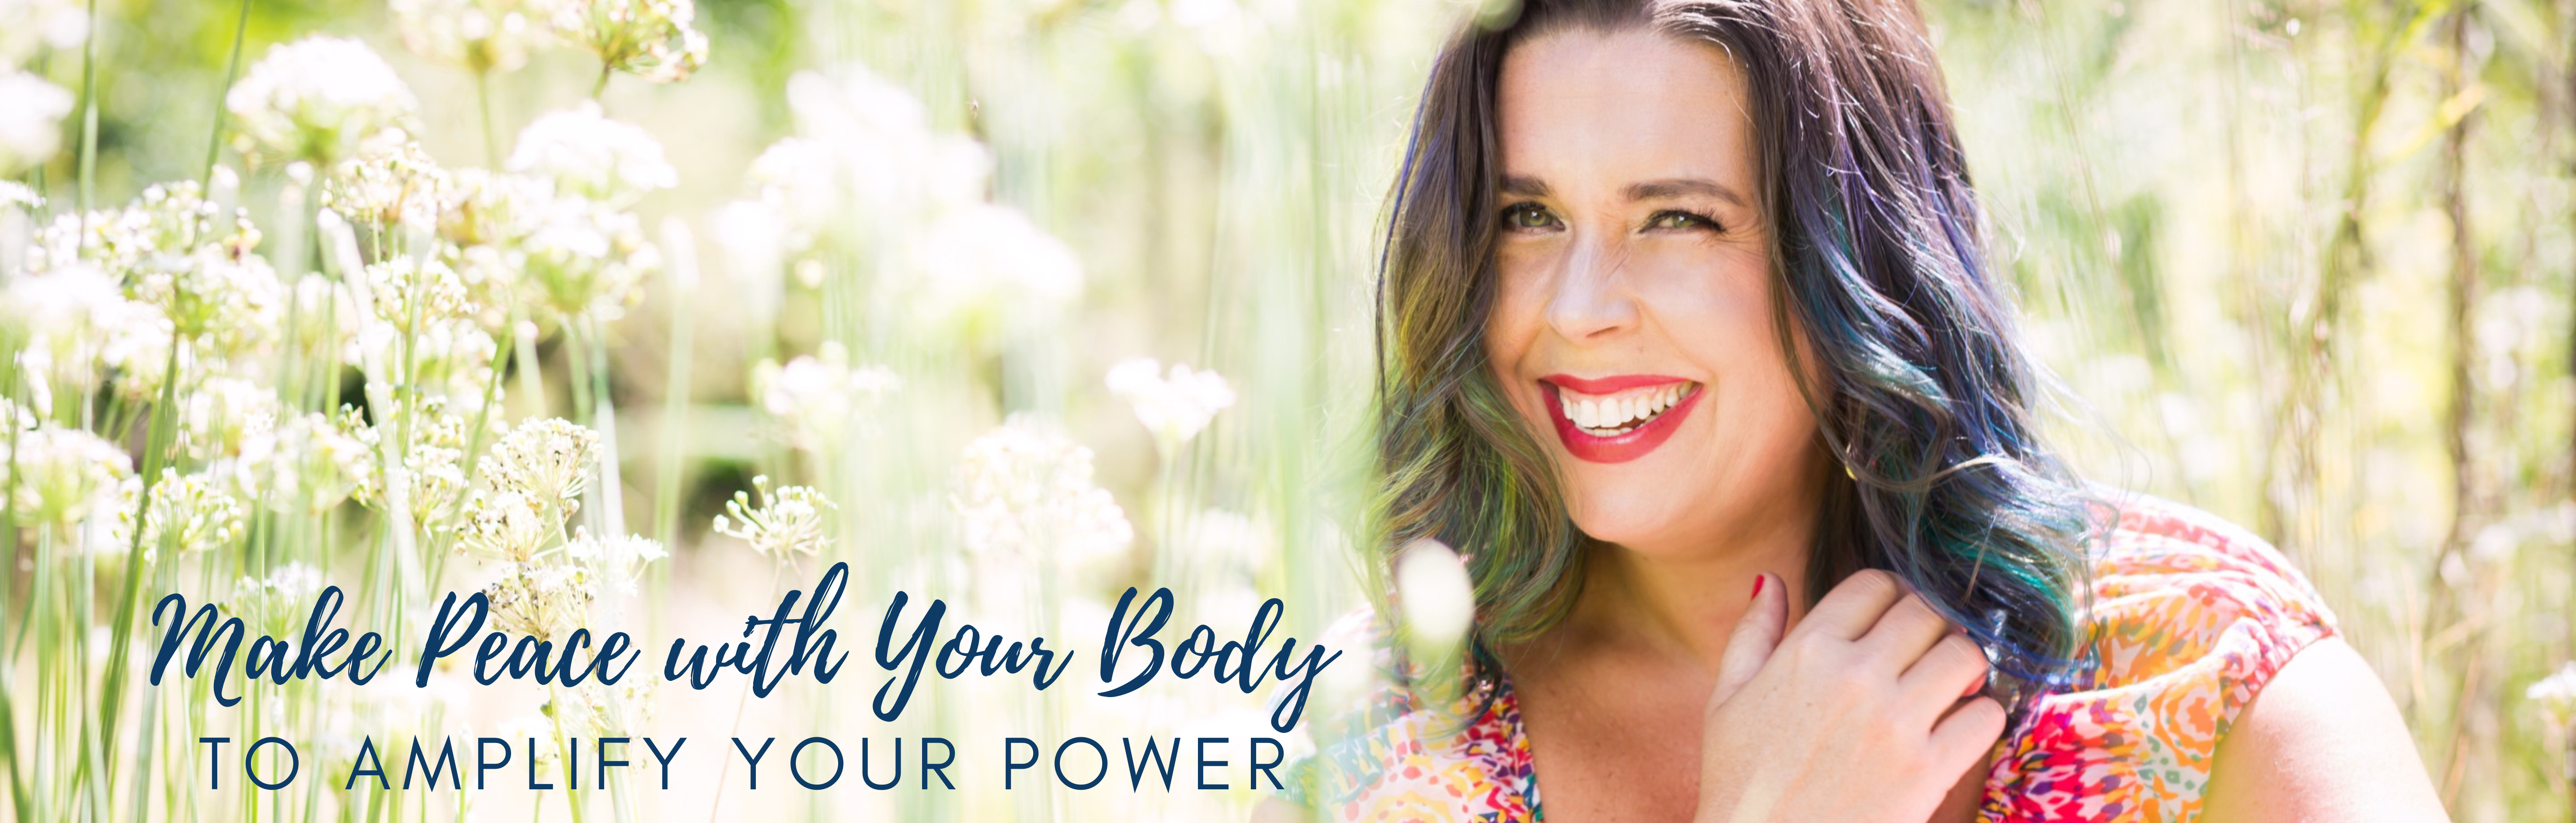 Make peace with your body to transform your life